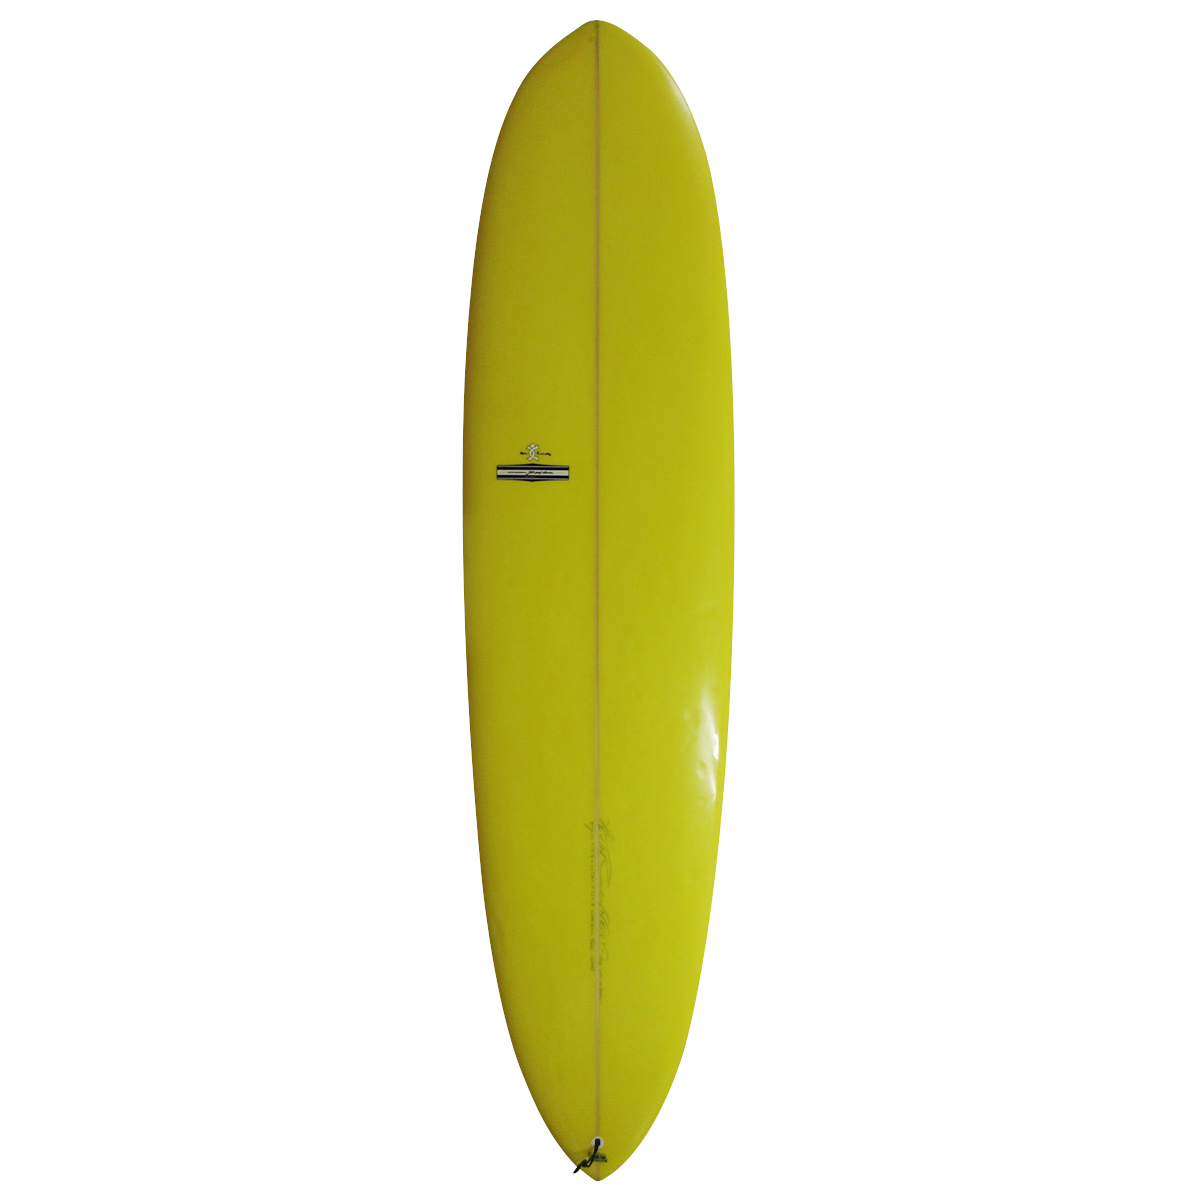 YU SURF CLASSIC / MAGIC CARPET 7`10 Shaped by KEVIN CONNELLY